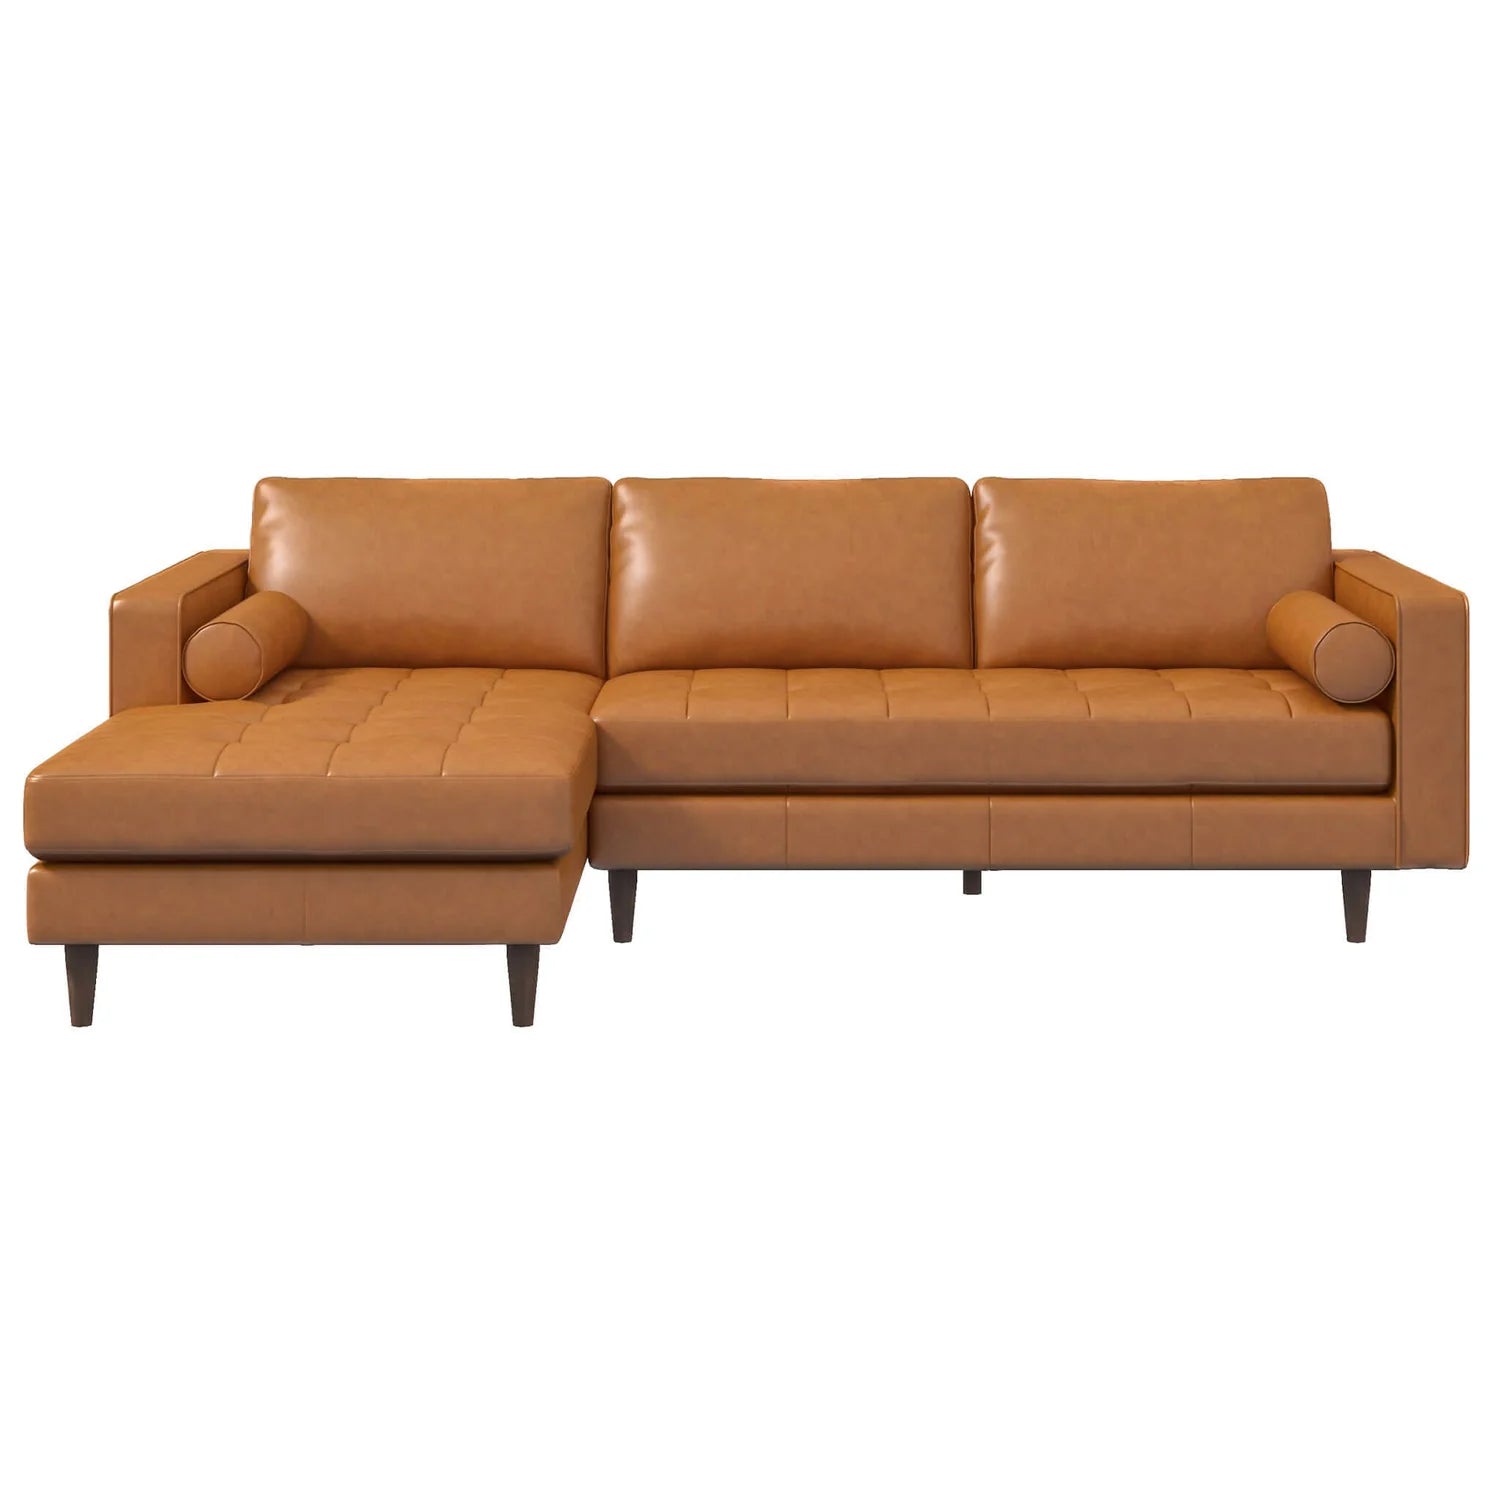 Anthony Tan Genuine Leather Sectional Sofa (Left Facing) - Berre Furniture